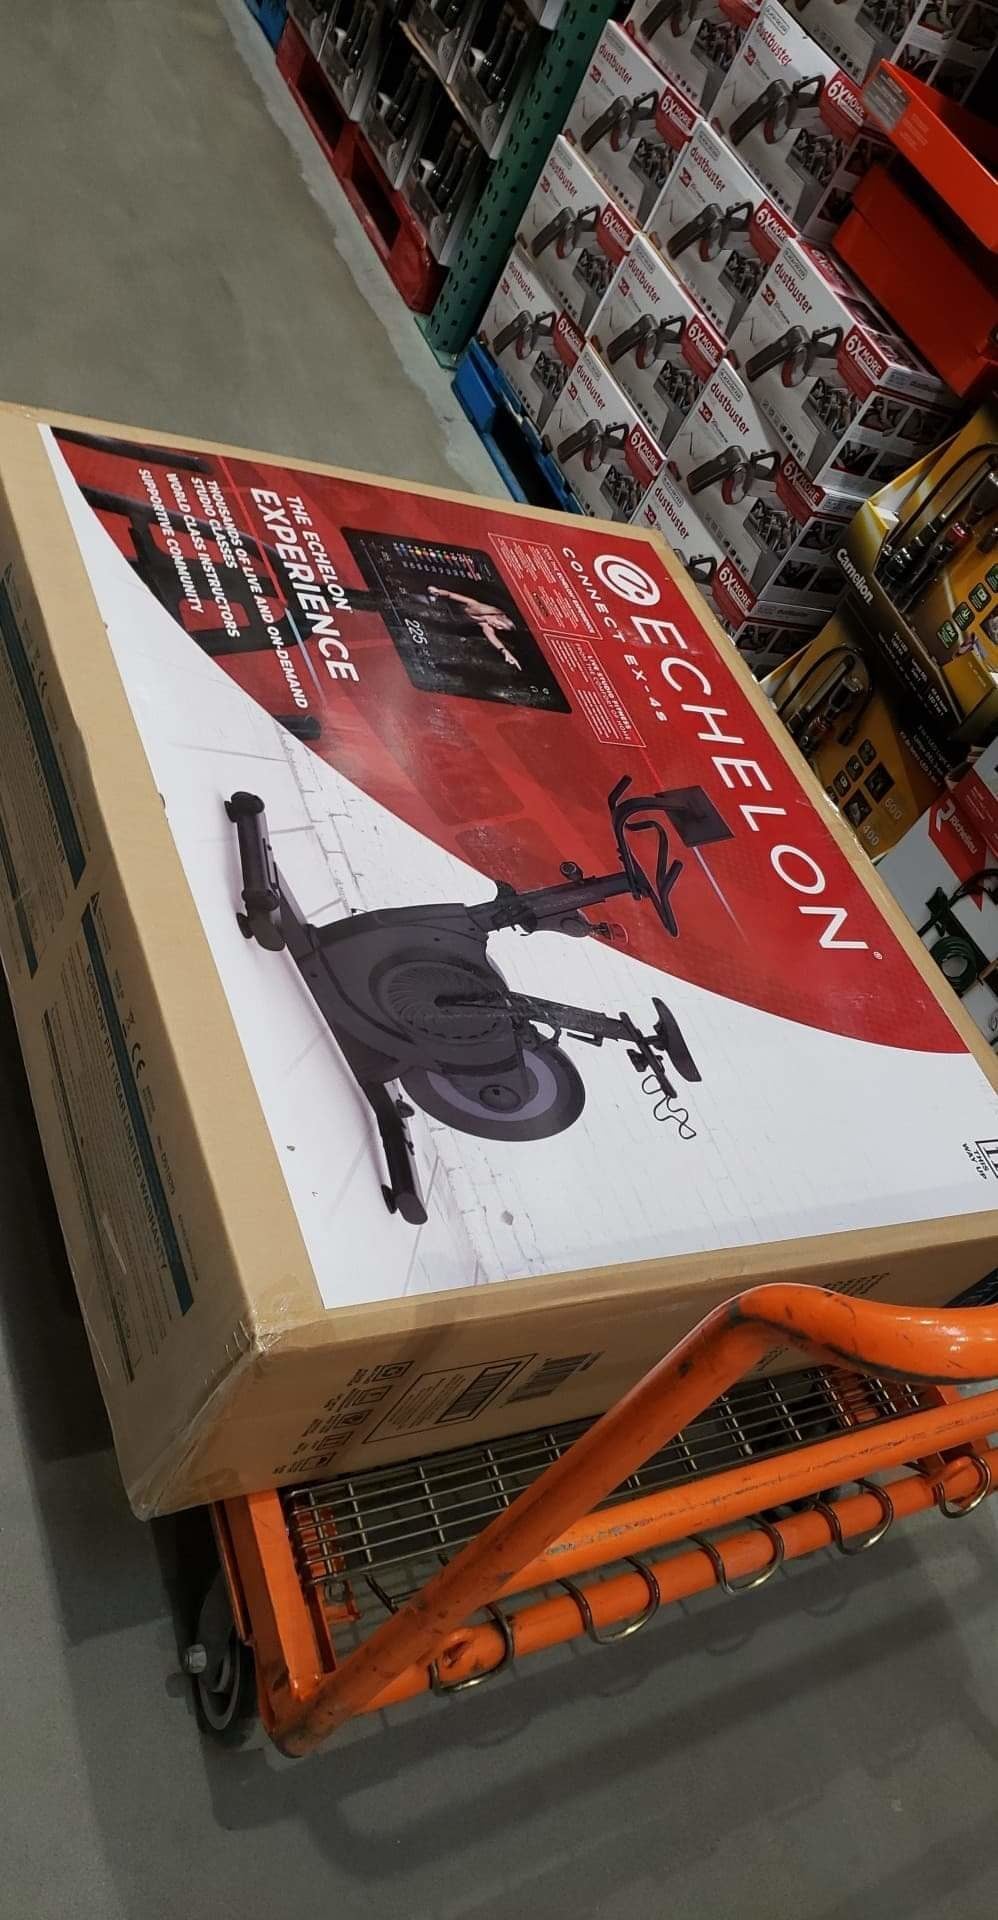 Echelon Costco Review / Ymmv Inspire Fitness Ic1 5 Indoor Cycle Spin Bike Costco B M 519 99 ...